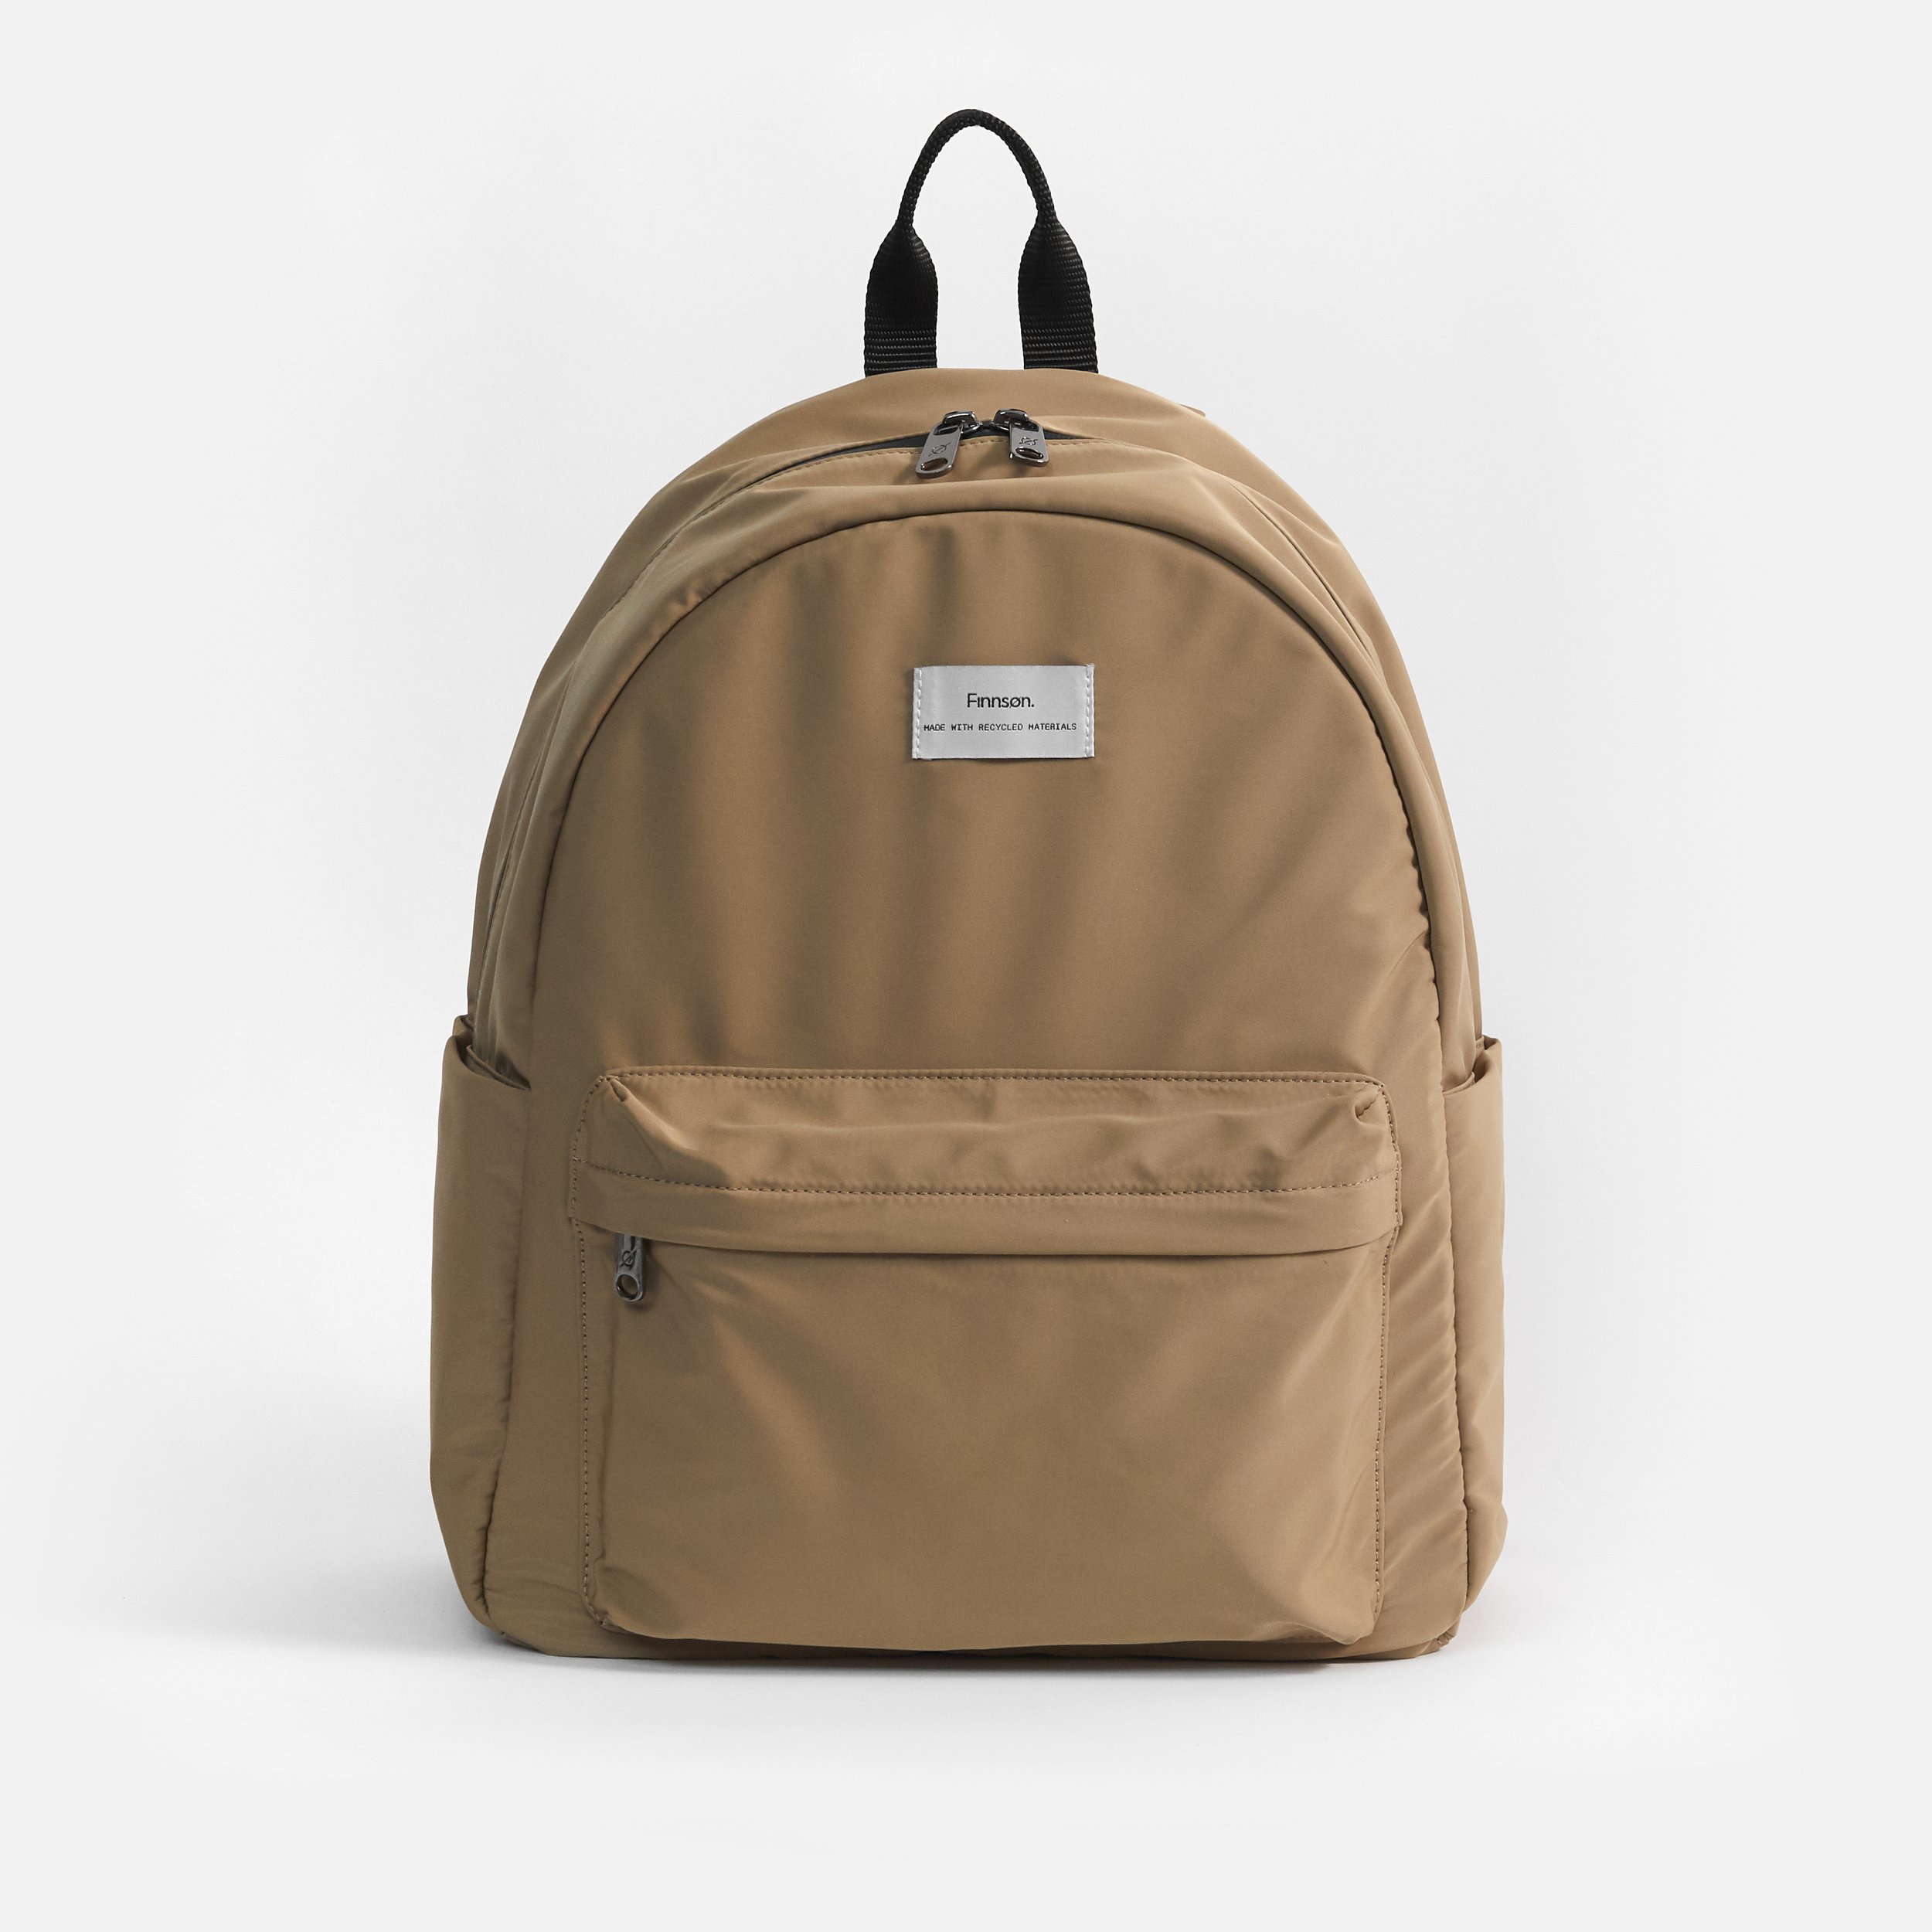 FINNSON ANA Eco Changing Backpack-CAMEL 1.jpg